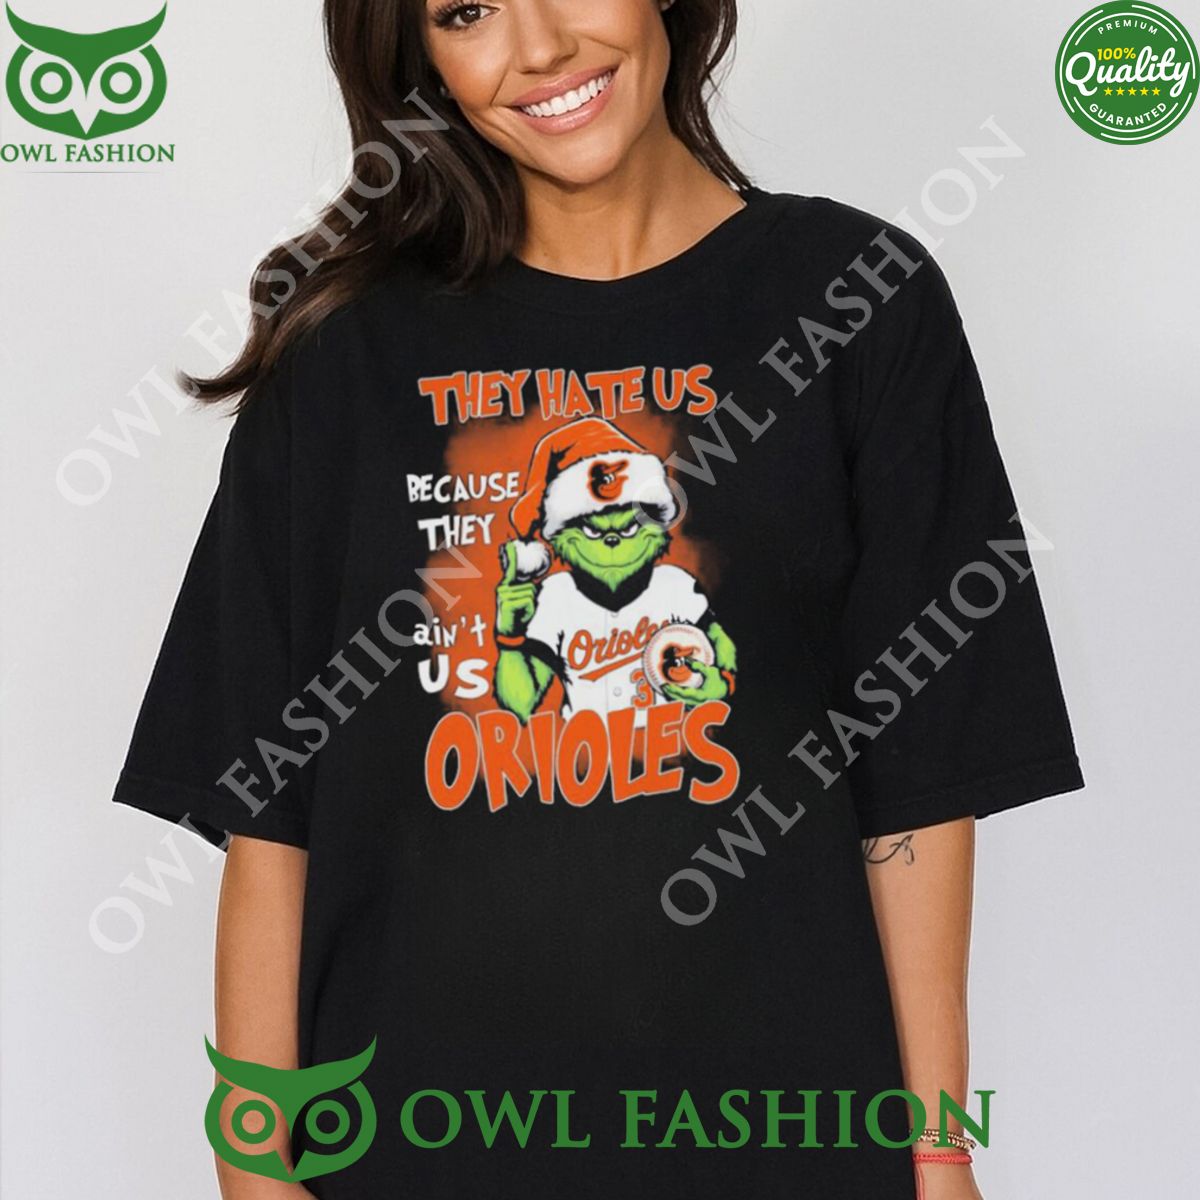 They Hate Us Because Ain’t Us Orioles Santa Grinch Christmas t Shirt